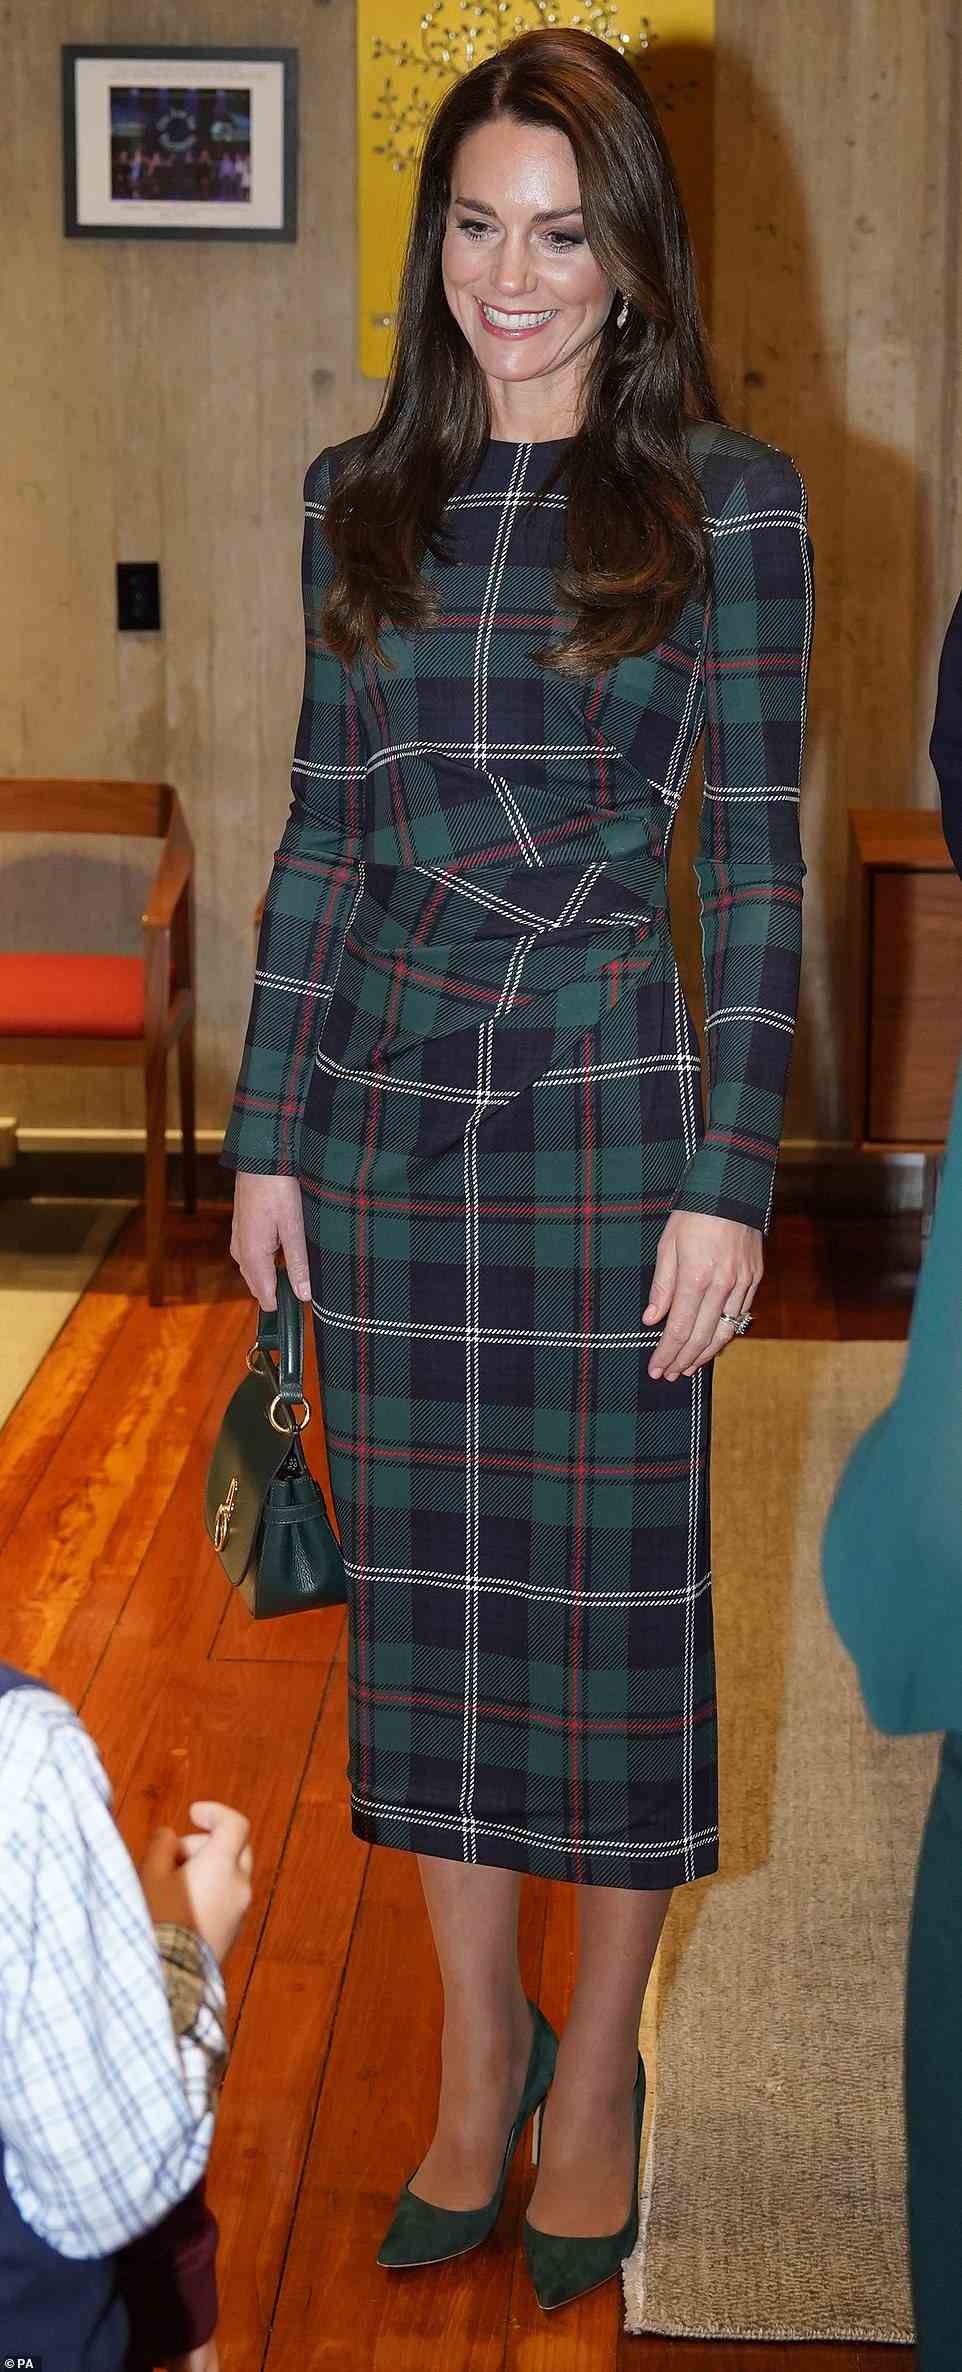 At an Earthshot launch on Wednesday, Kate made a sartorial statement about climate change in a green plaid Burberry dress, which she paired with a with matching Alexander McQueen coat and Mulberry bag